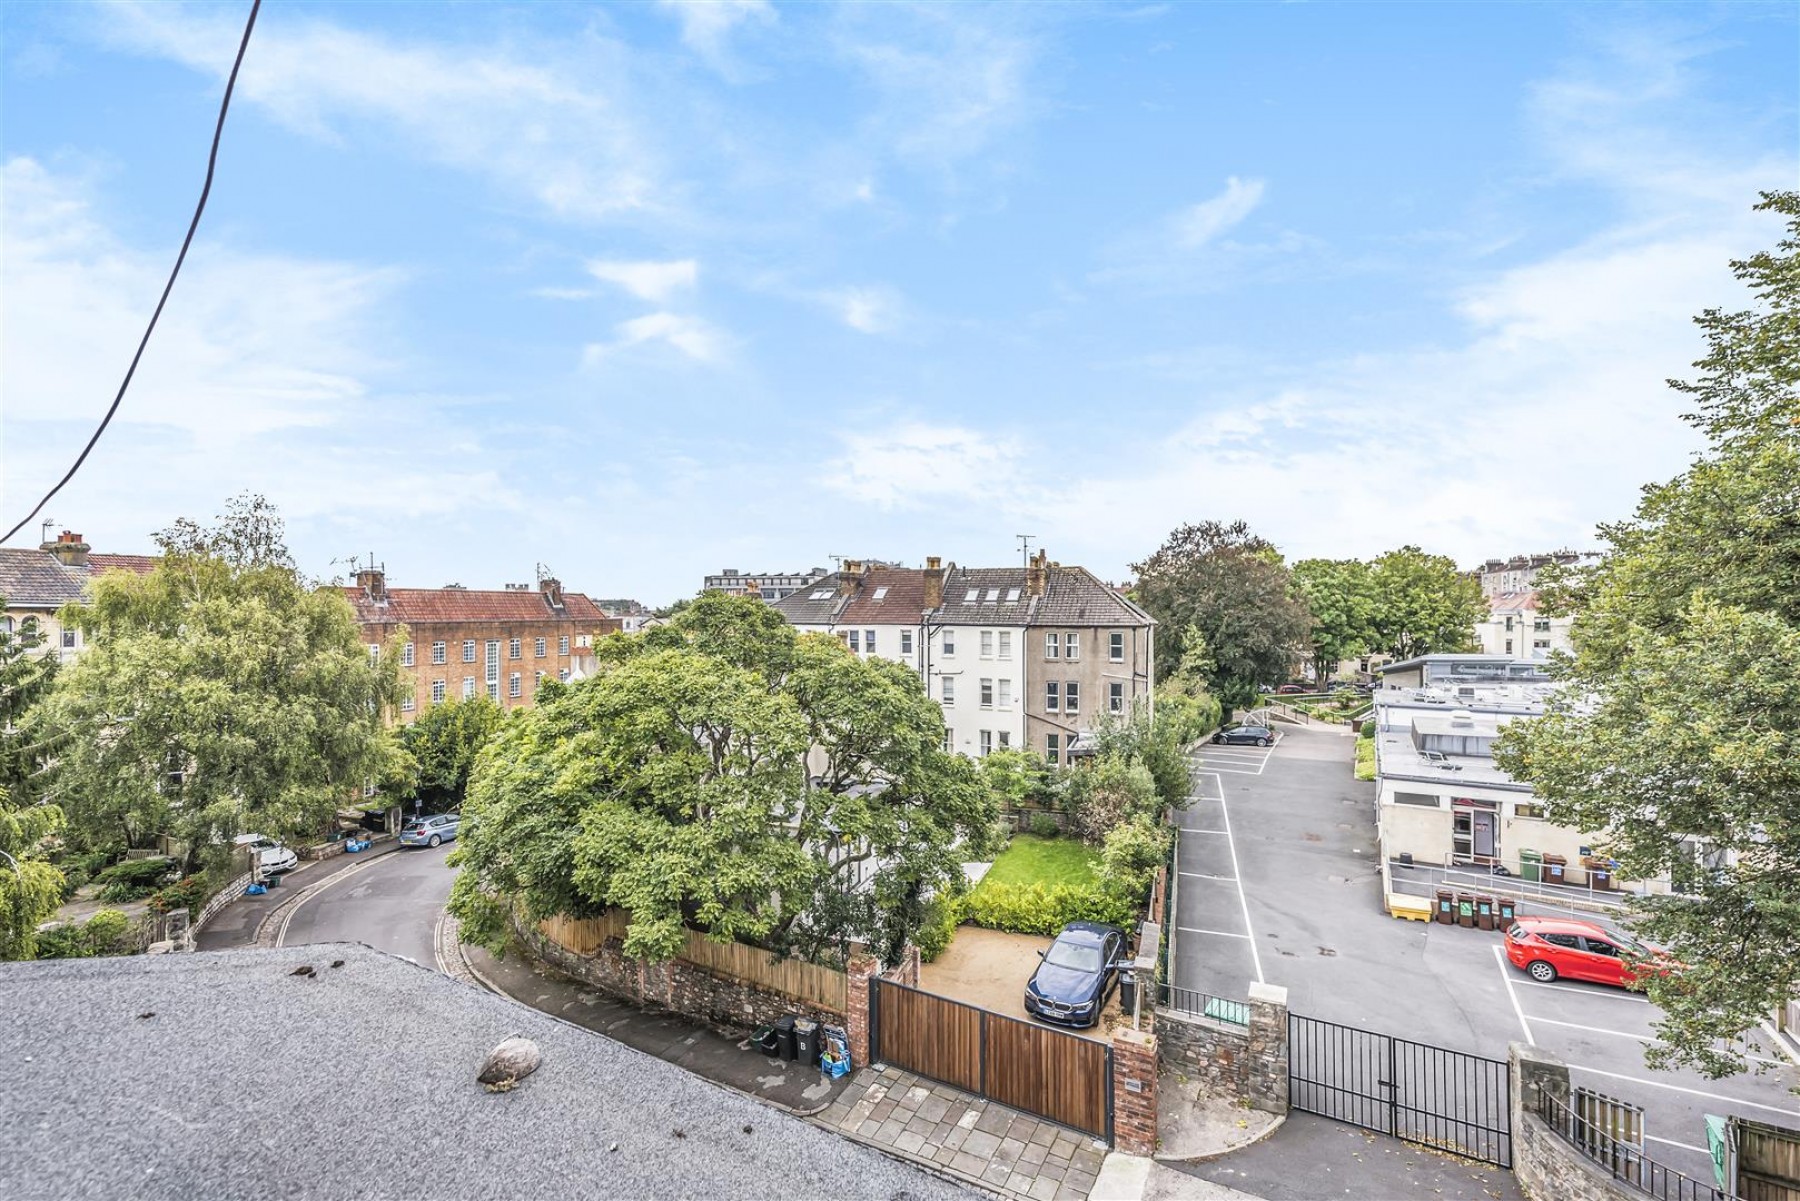 Images for CLIFTON FLAT FOR UPDATING & REDUCED PRICE